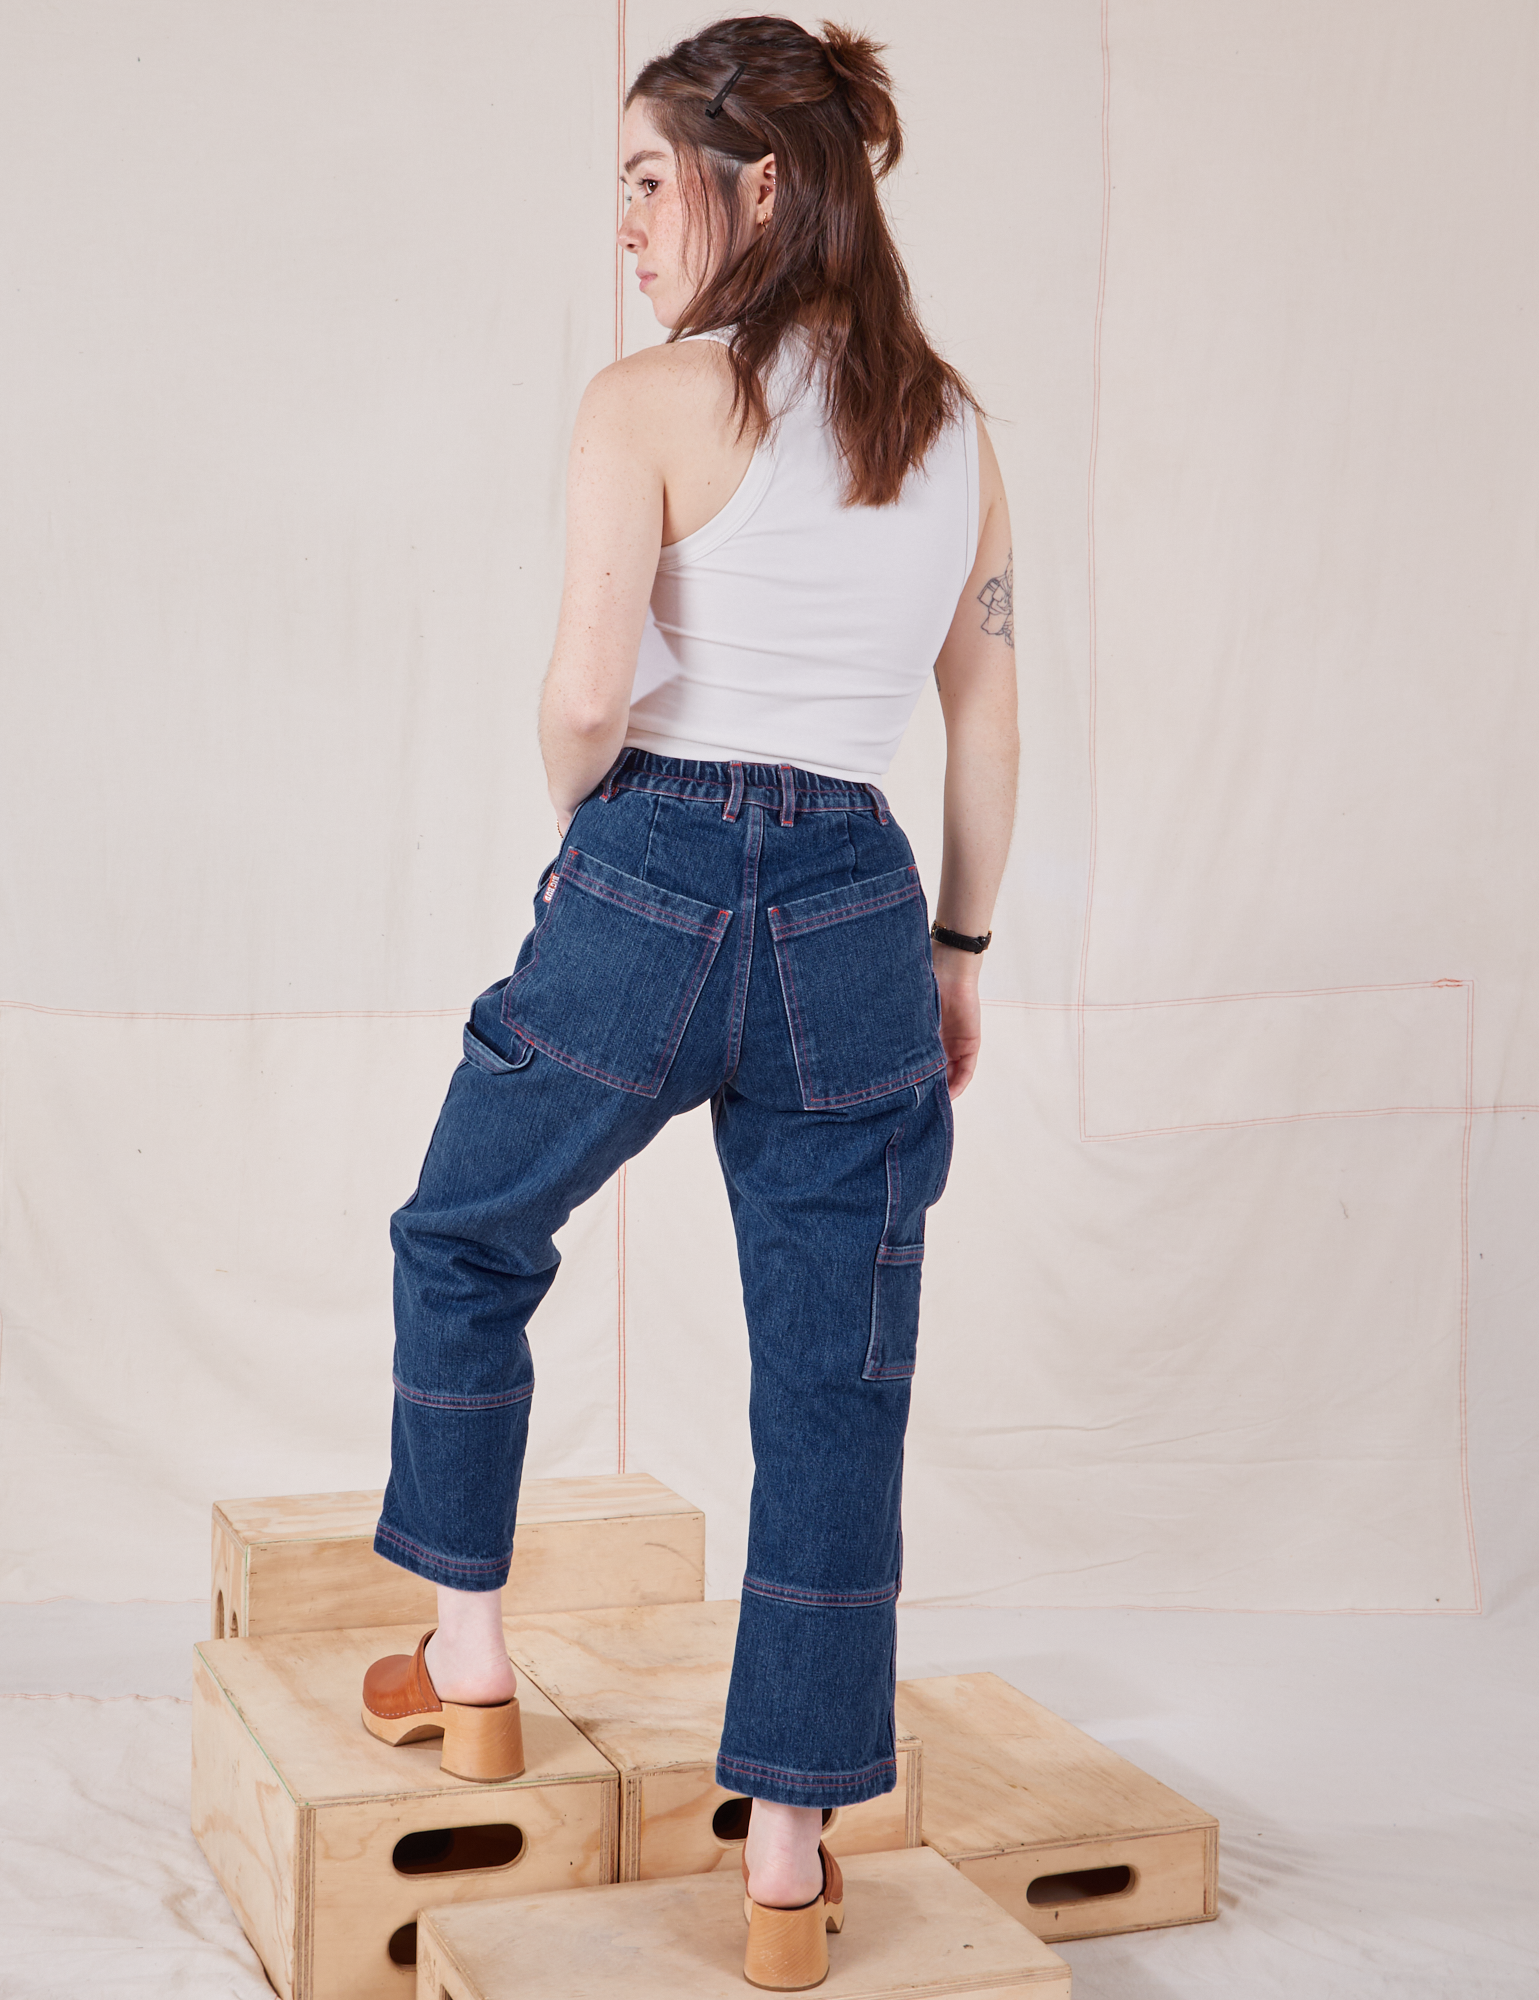 Back view of Petite Carpenter Jeans in Dark Wash and Tank Top in vintage tee off-white on Hana